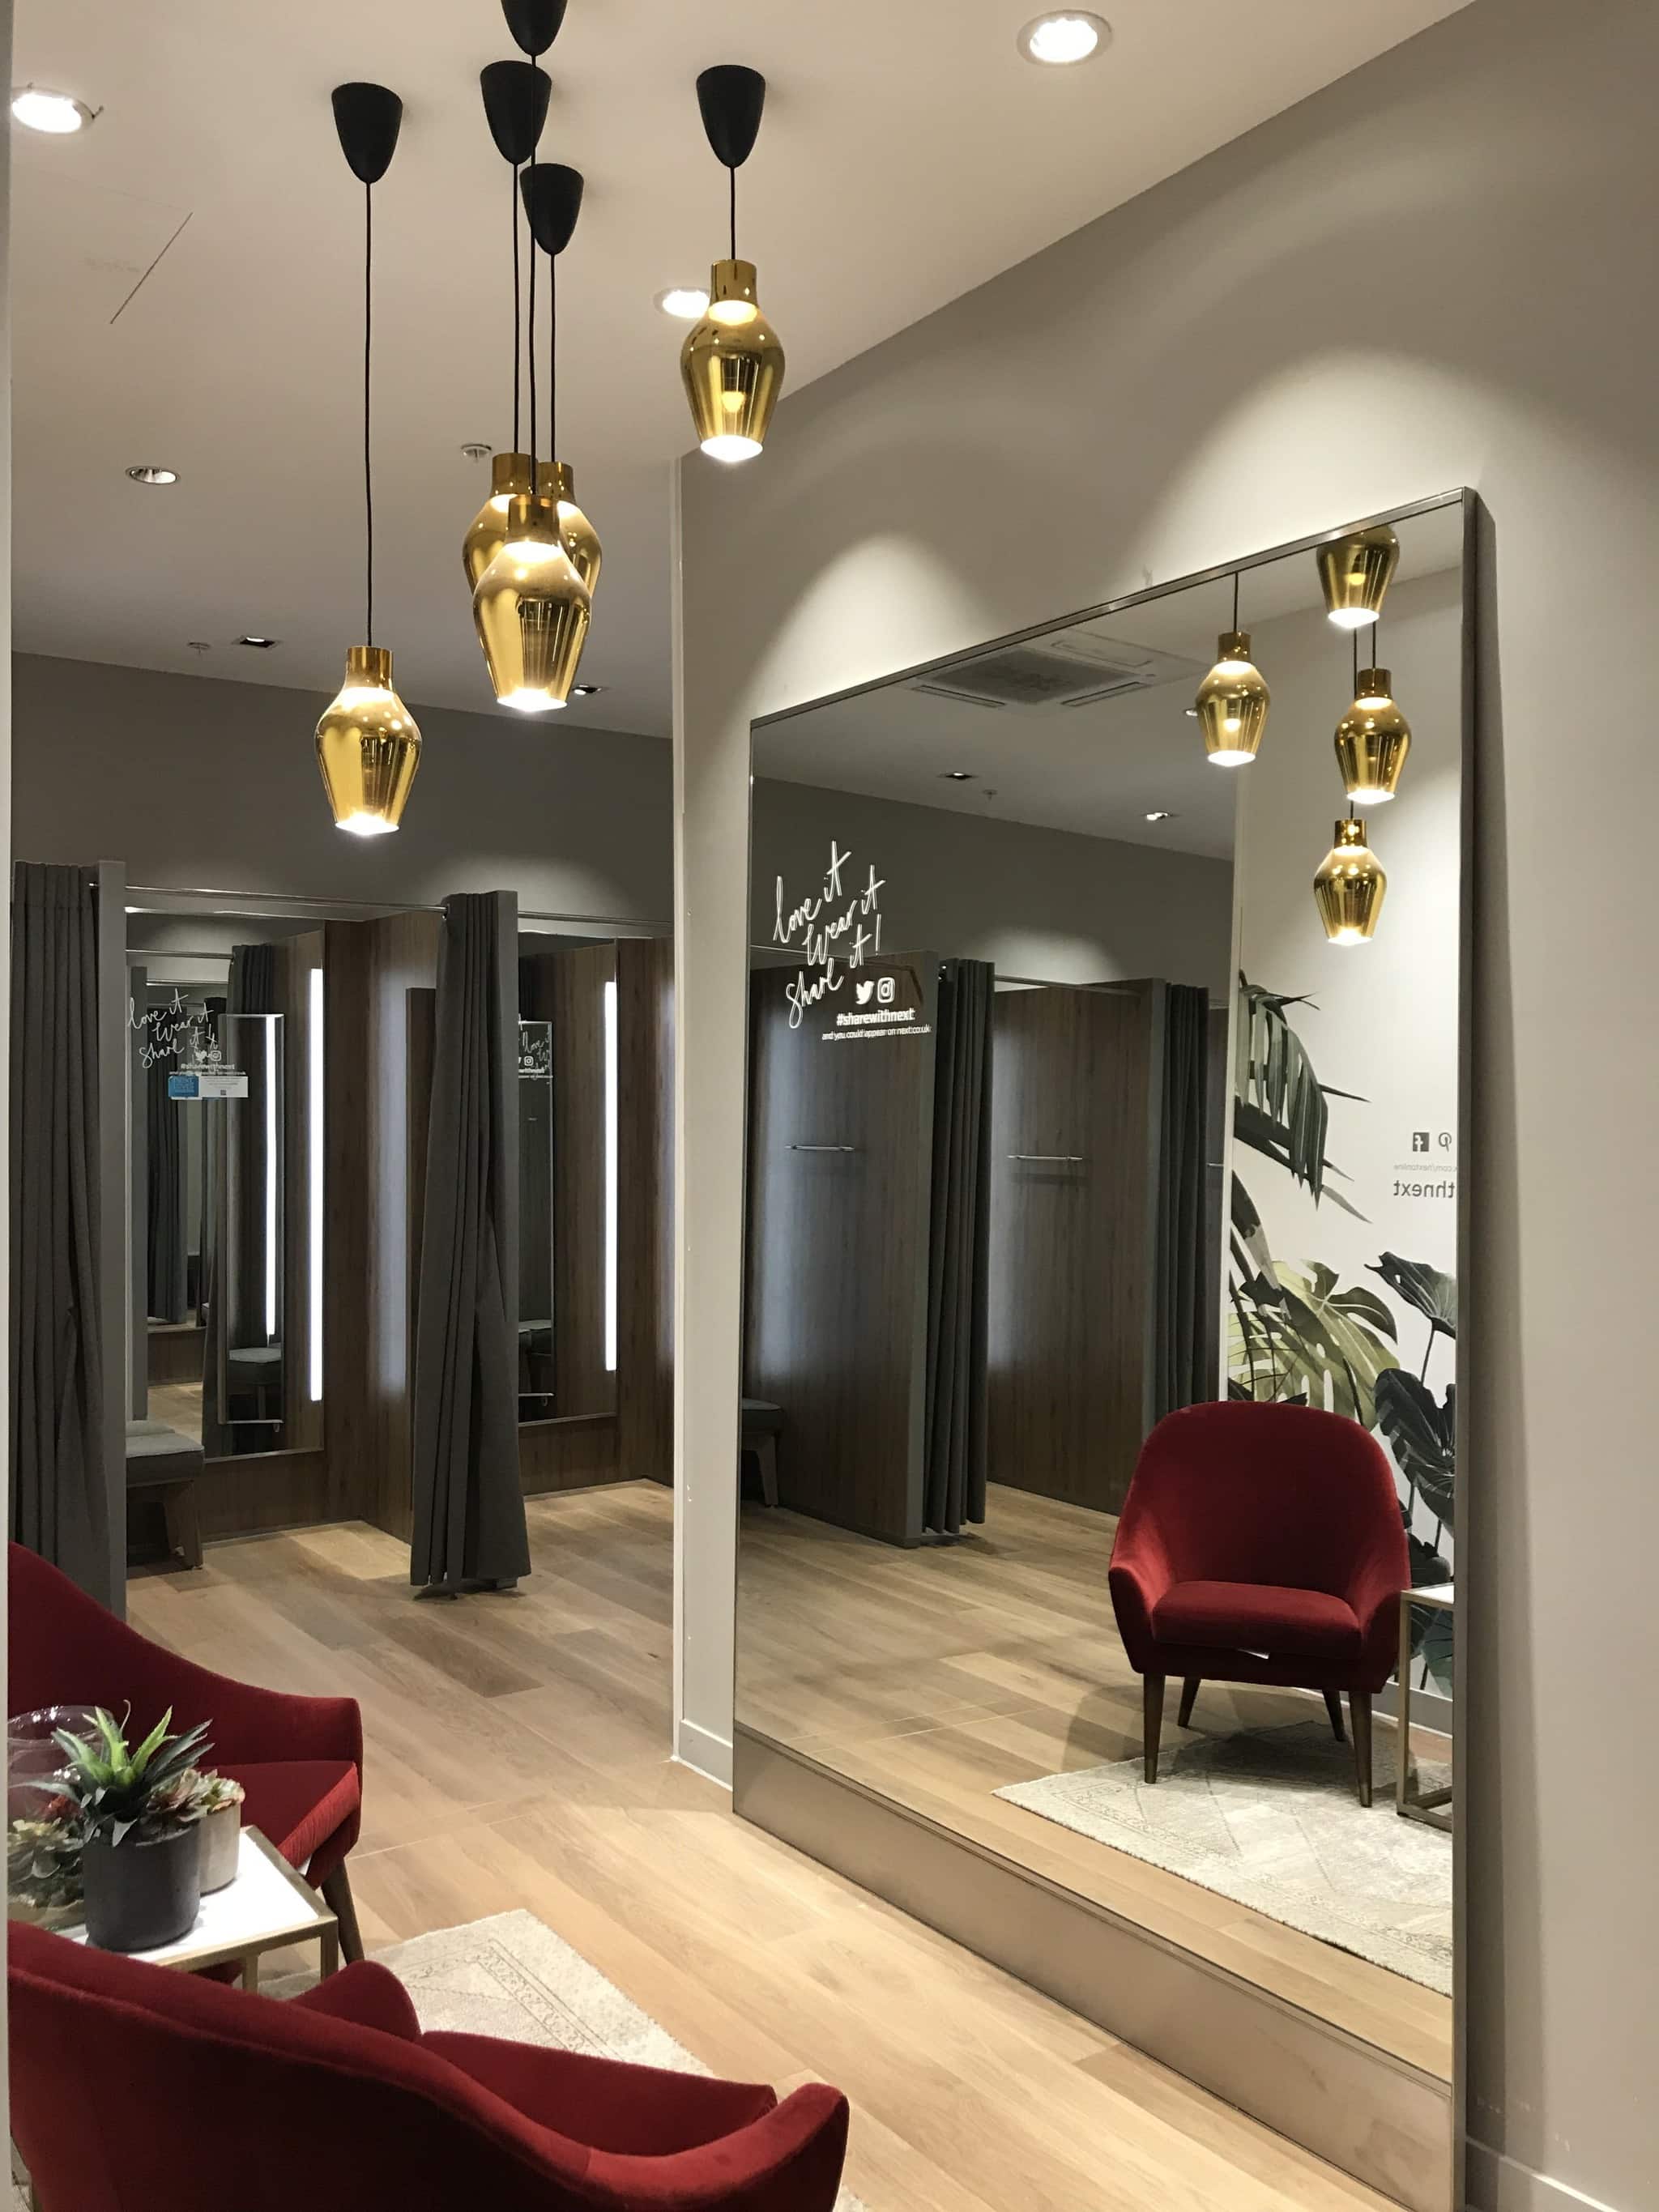 Retail dressing room with large floor length mirrors and hanging pendant lighting